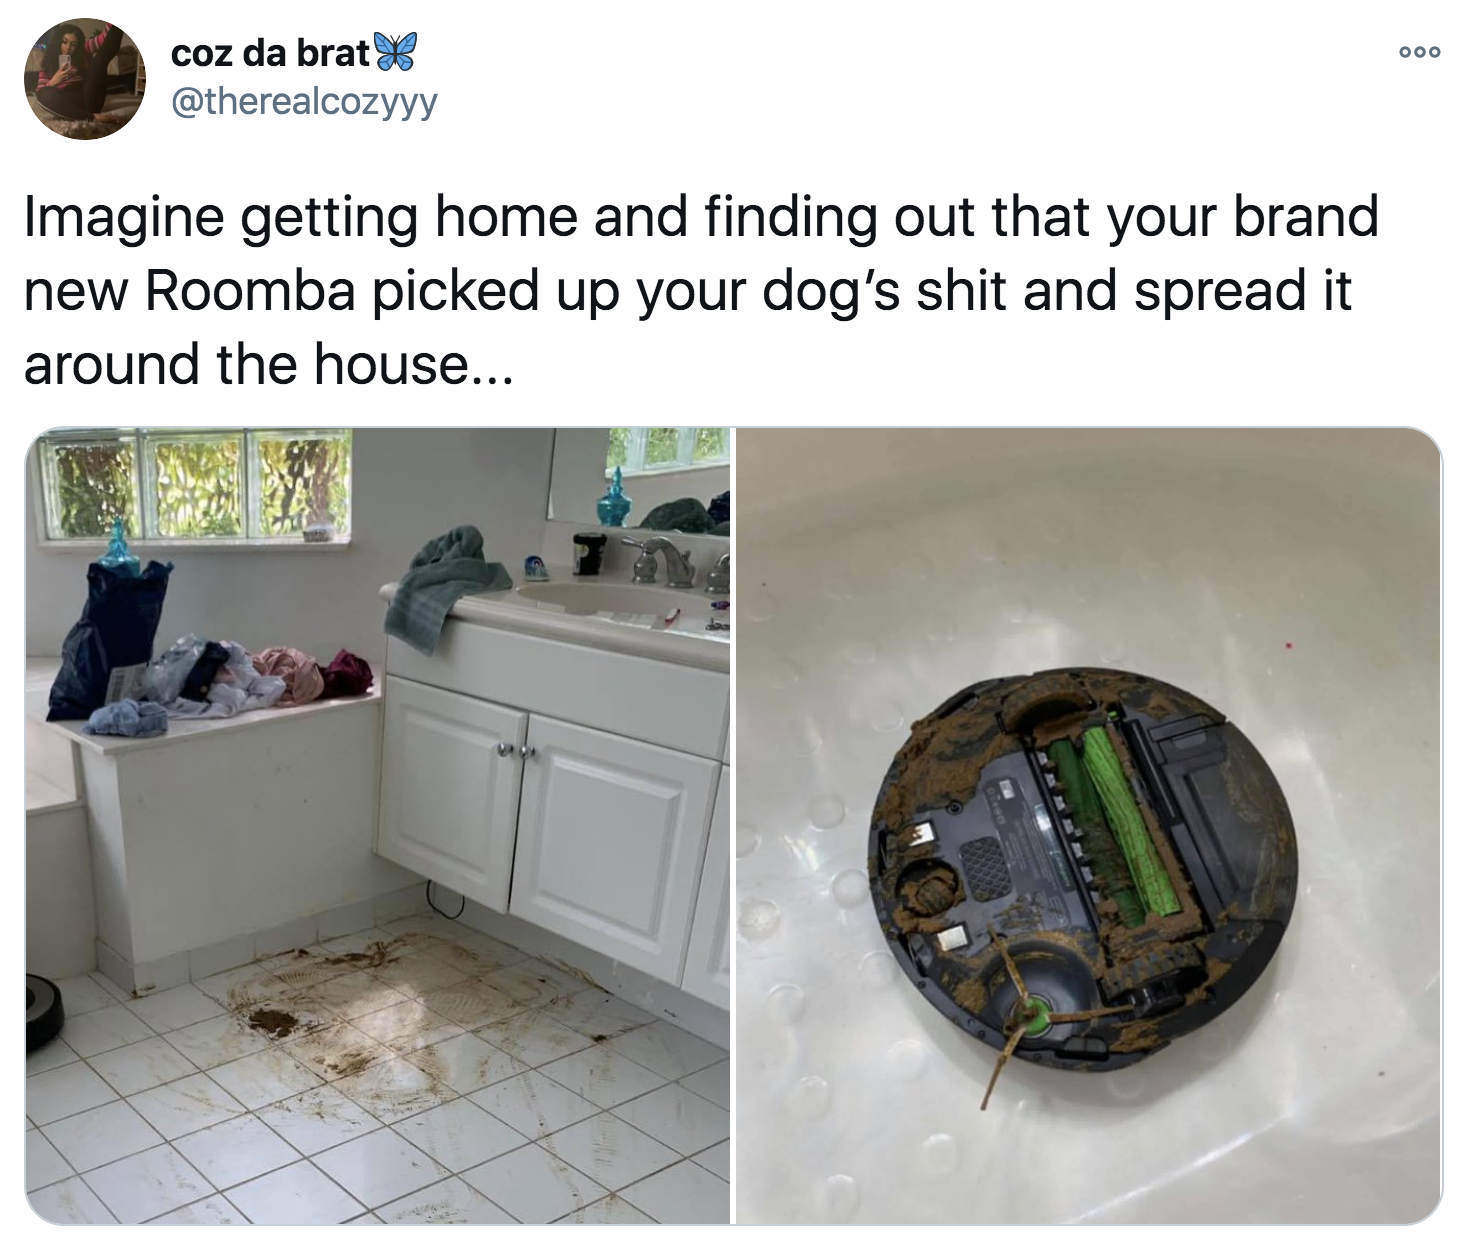 tweet reading Imagine getting home and finding out that your brand new Roomba picked up your dog’s shit and spread it around the house...